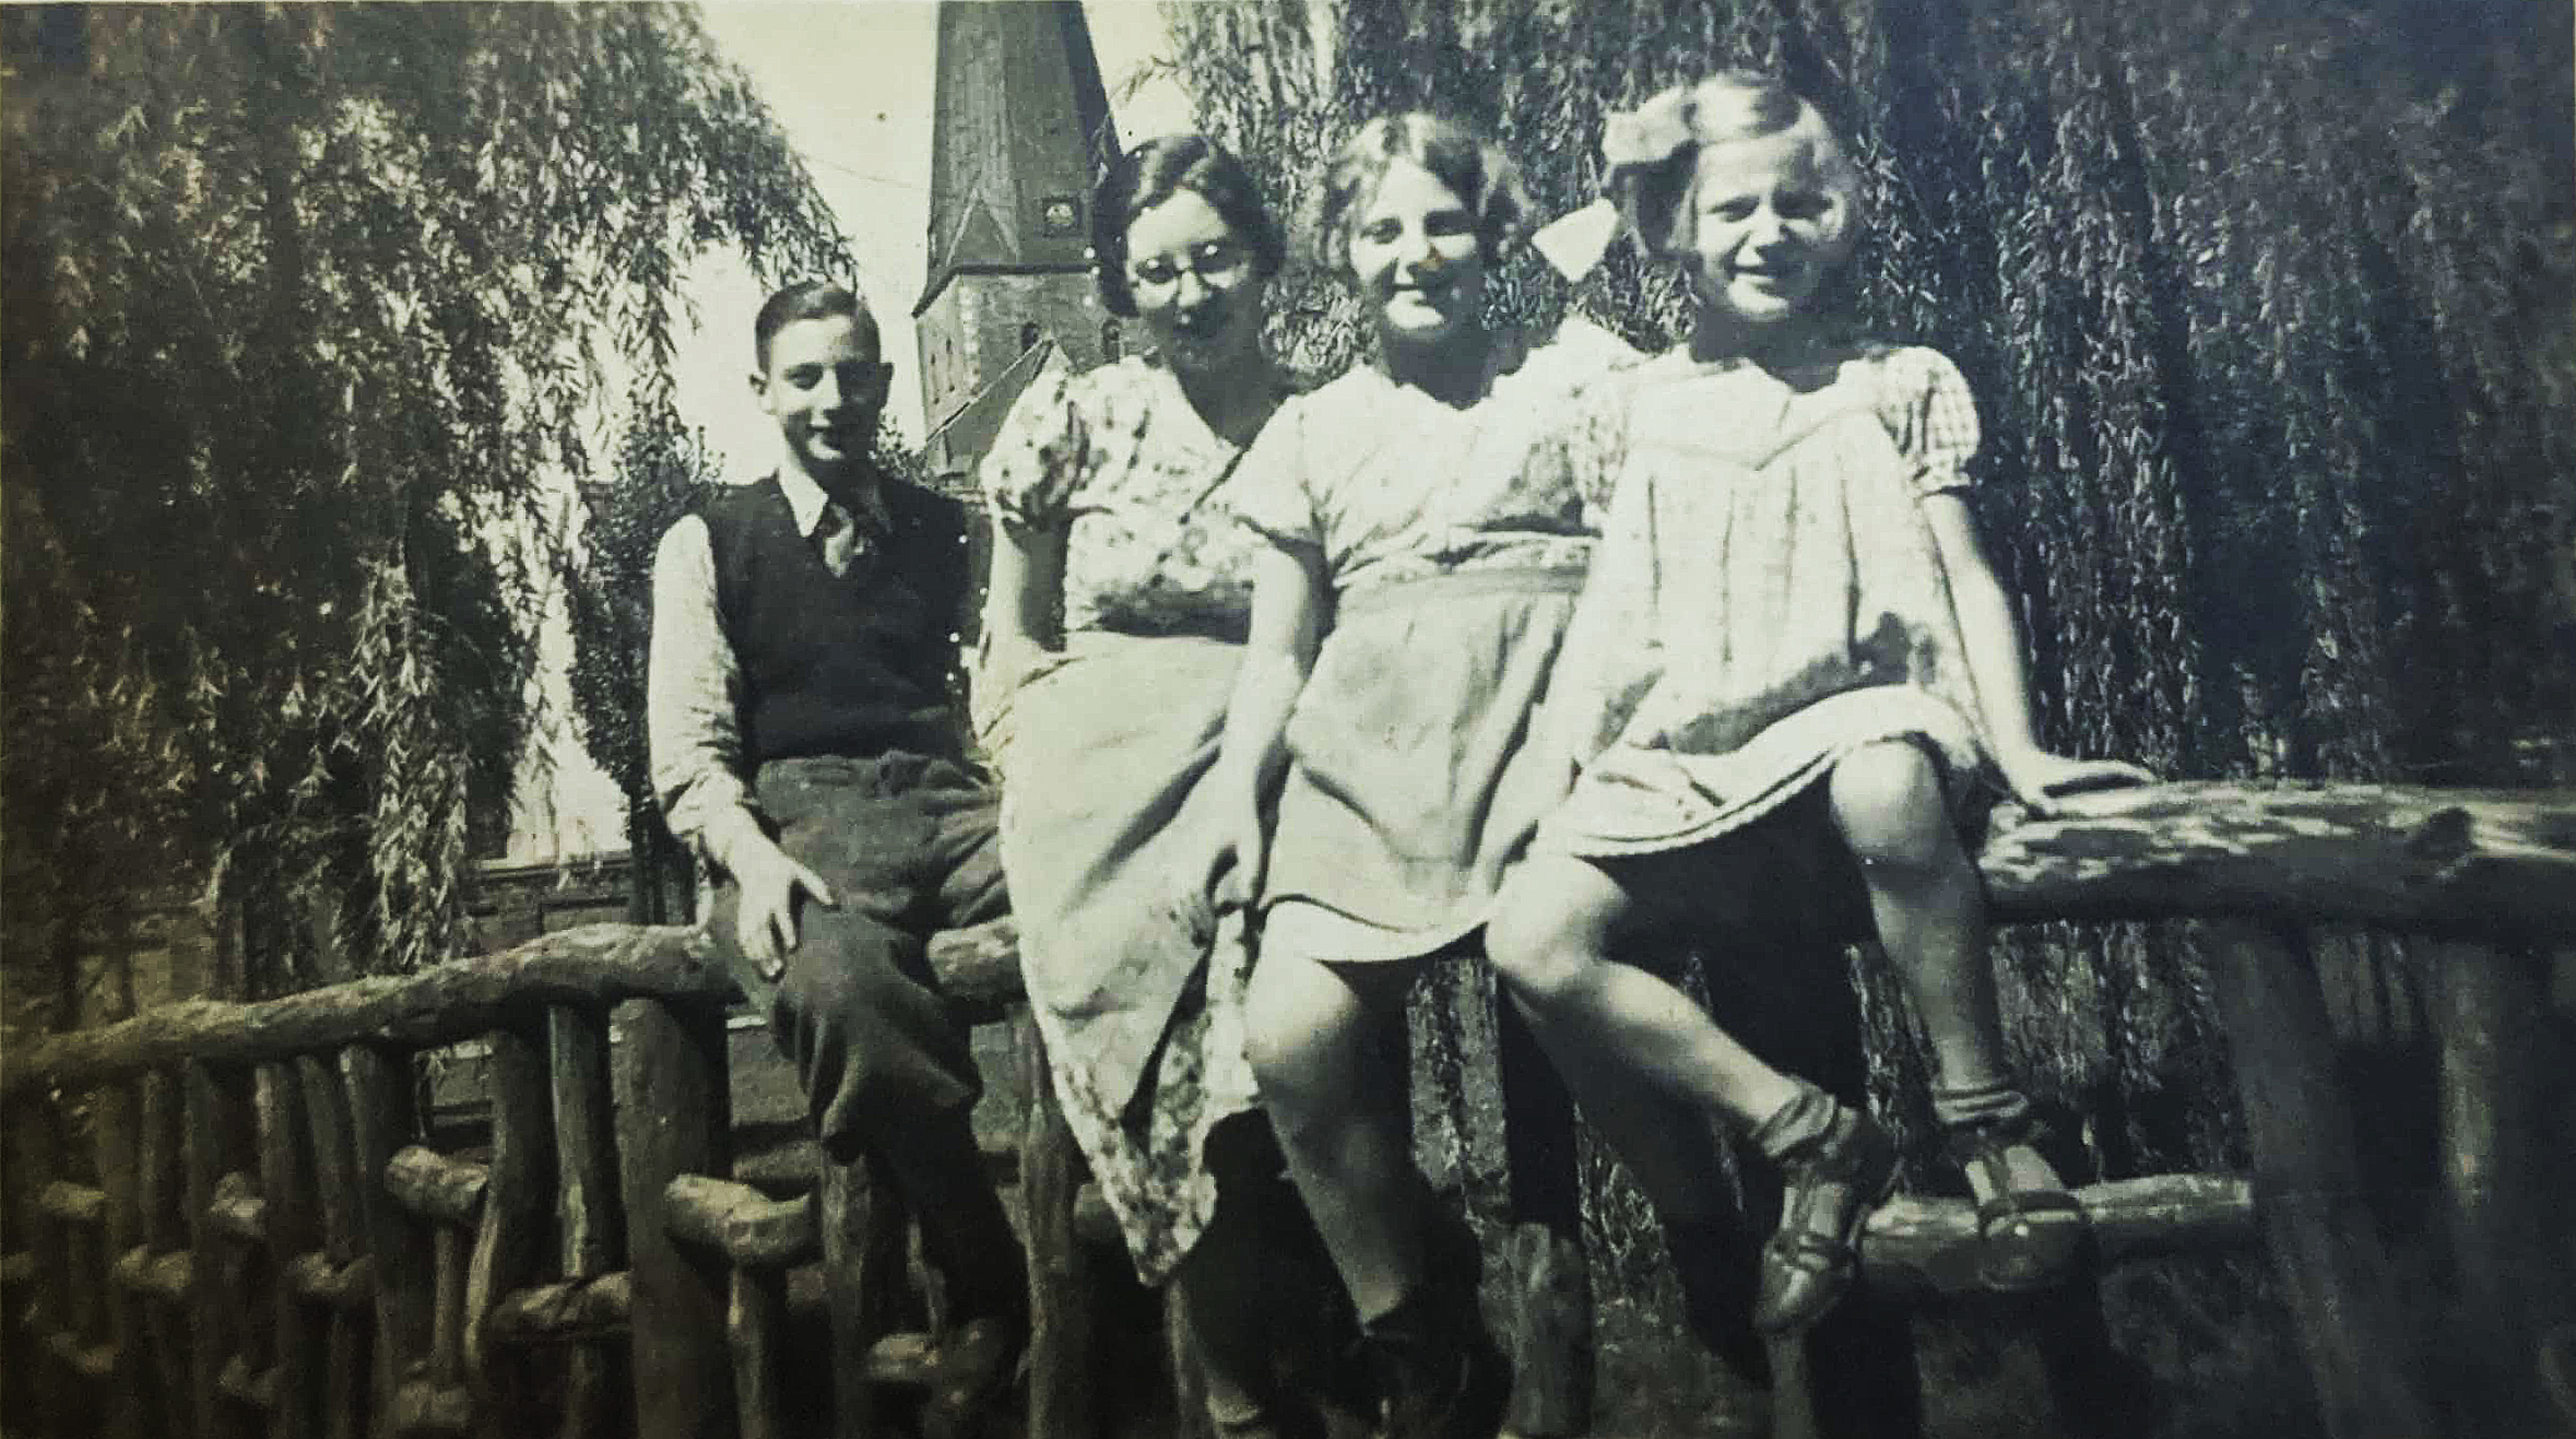 Vardit, in a family photo with her brothers and sisters. Vardit is the first on the right, the youngest of the children.